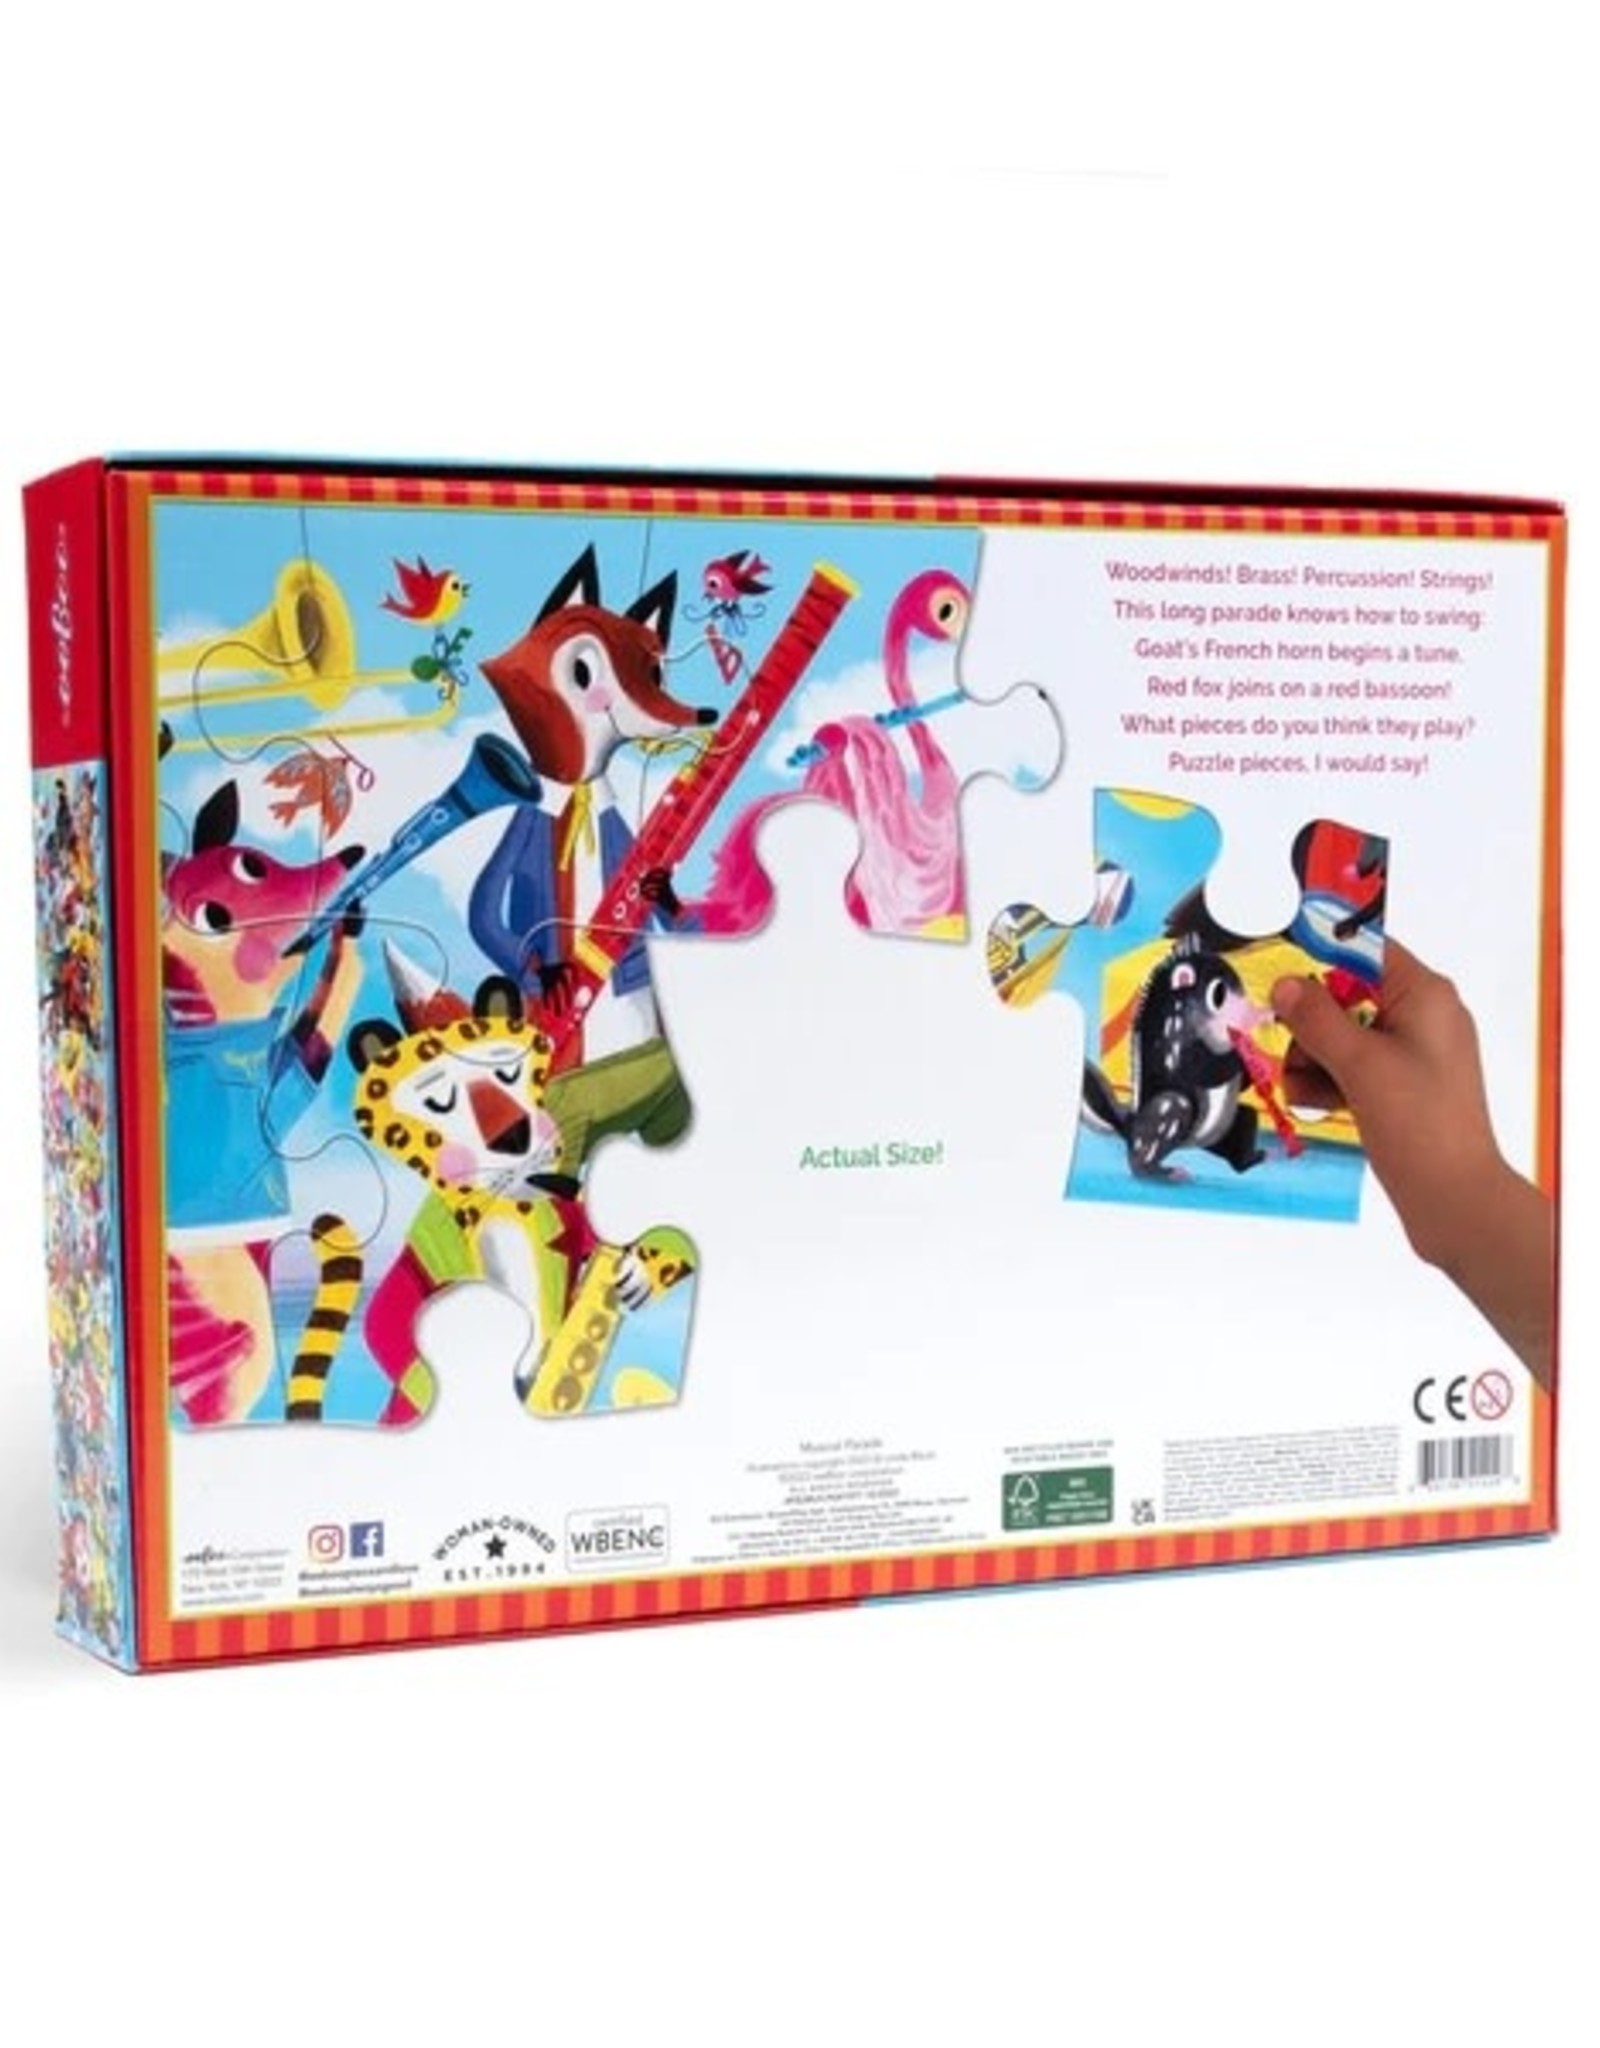 eeBoo MUSICAL PARADE READY TO LEARN 36PC LONG PUZZLE